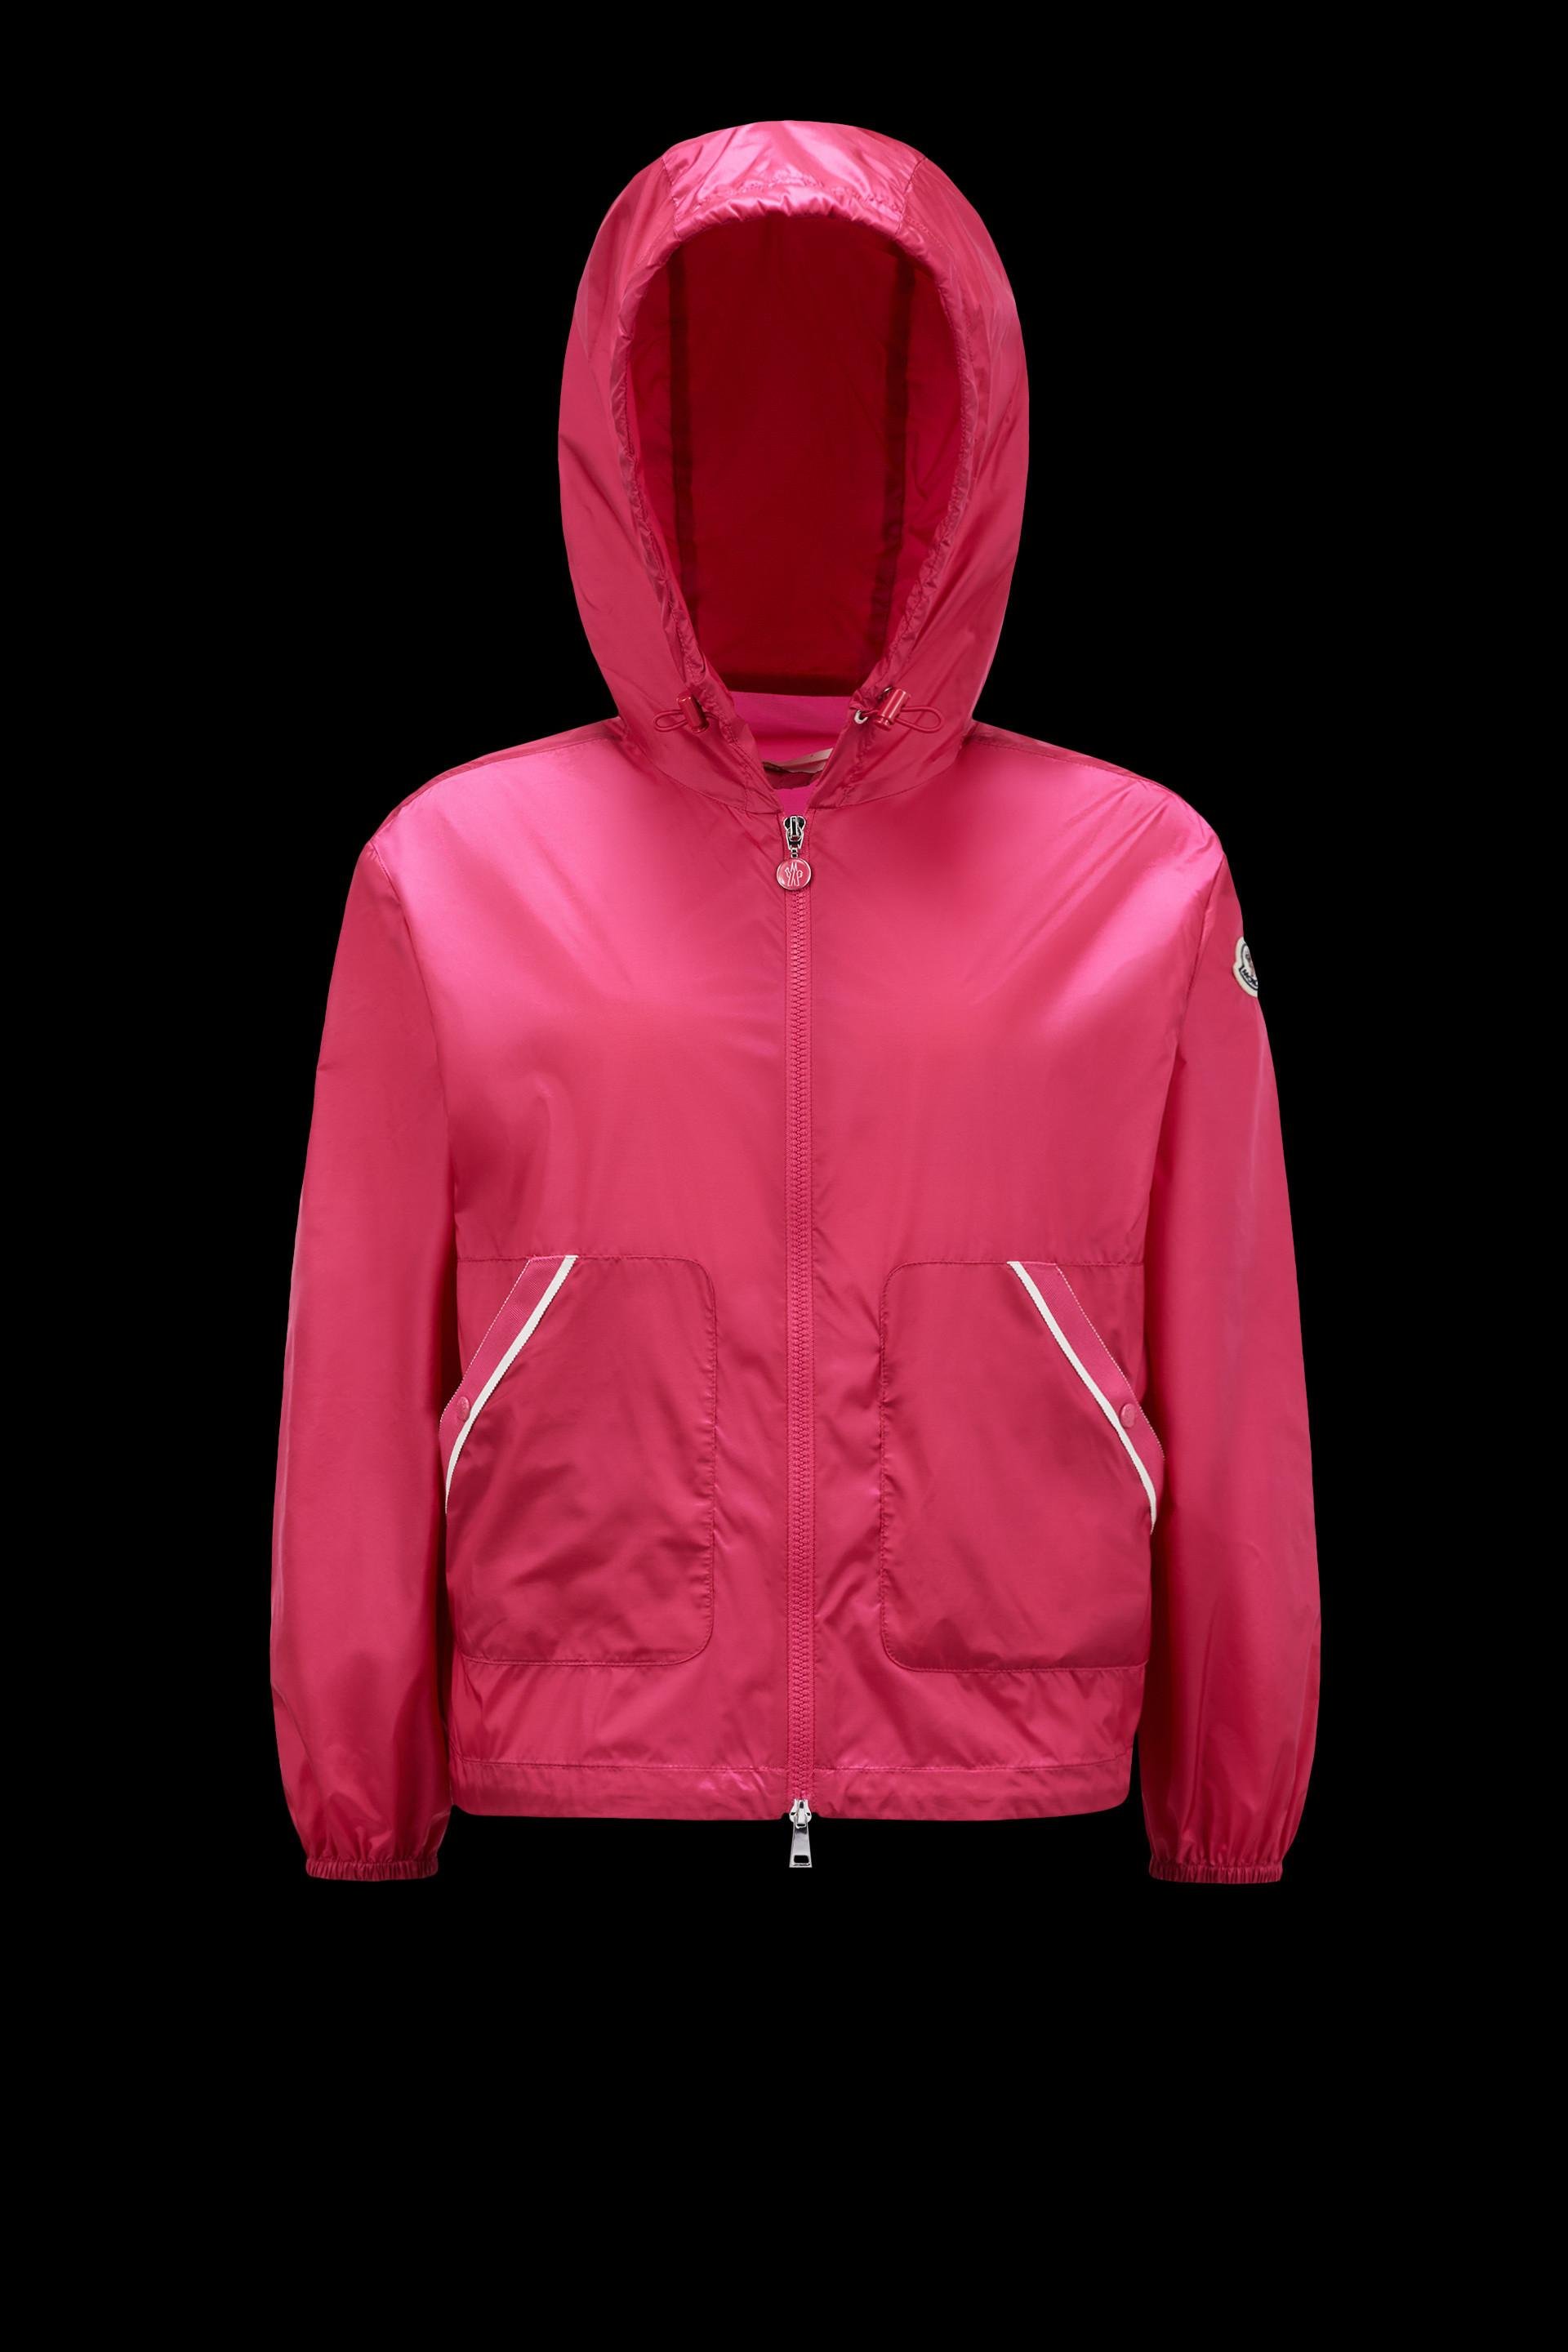 Filiria Hooded Jacket by MONCLER